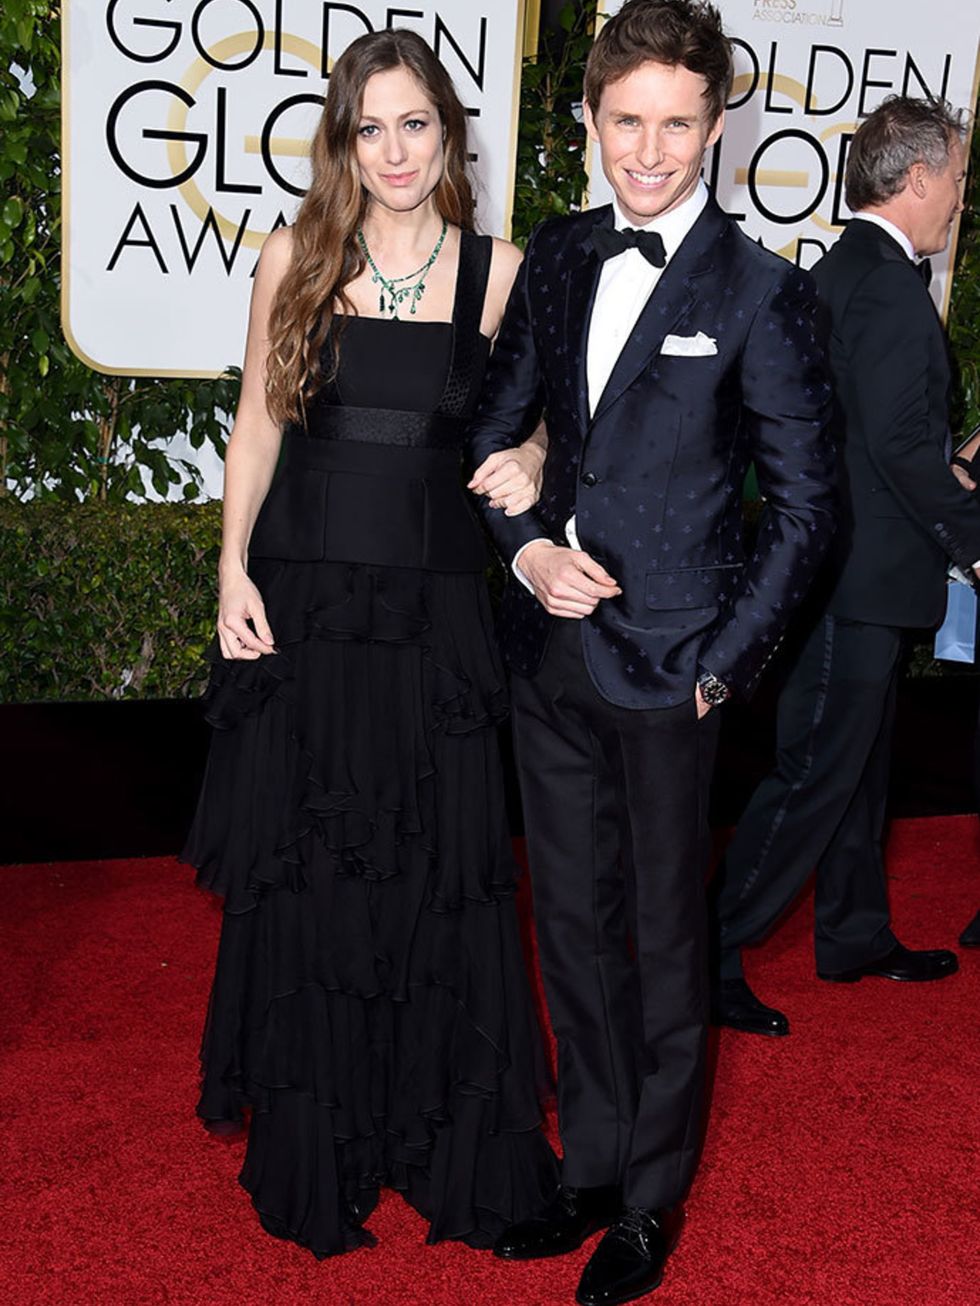 Eddie Redmayne and Hannah Bagshawe  attend the Golden awards in LA, January 2016.